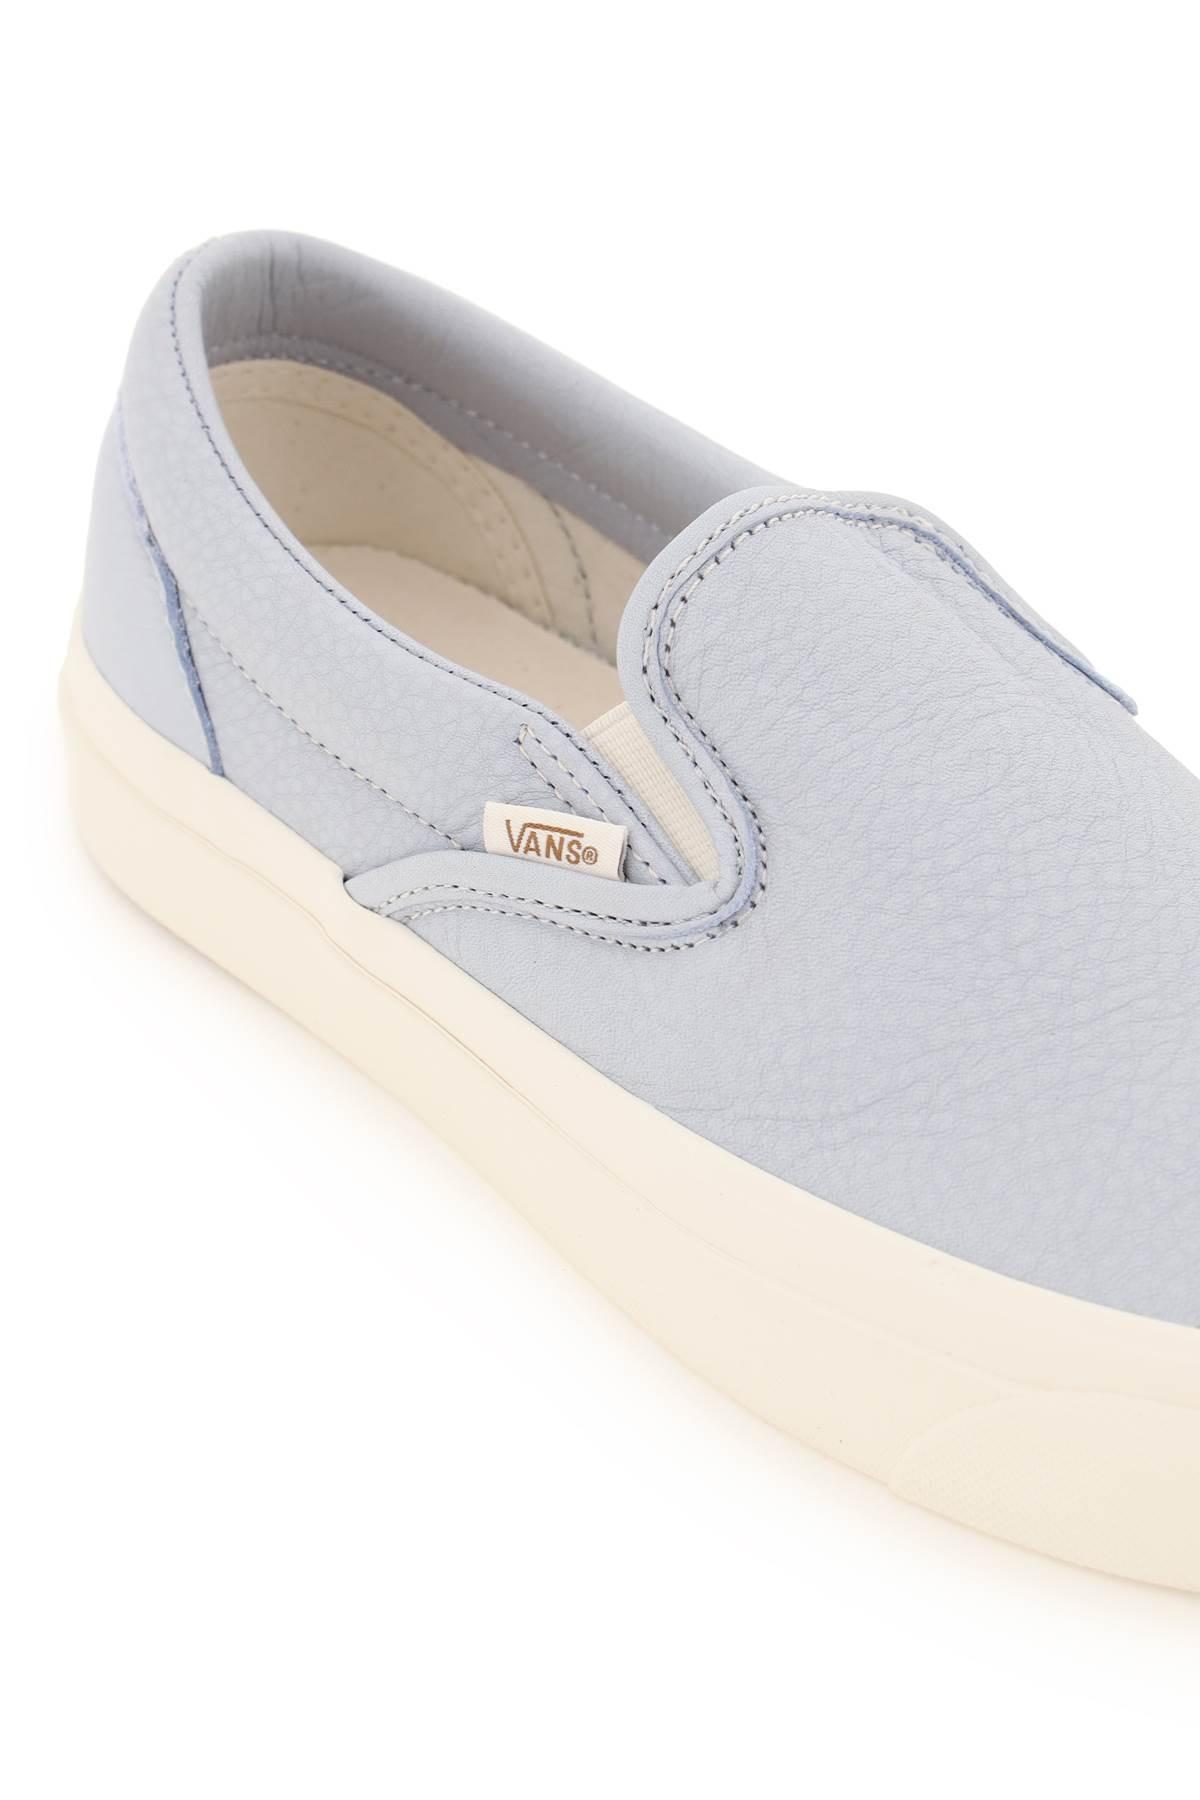 Vans Leather Classic Slip-on Eco Theory Sneakers in Blue White - Save 25% Womens Trainers Vans Trainers 